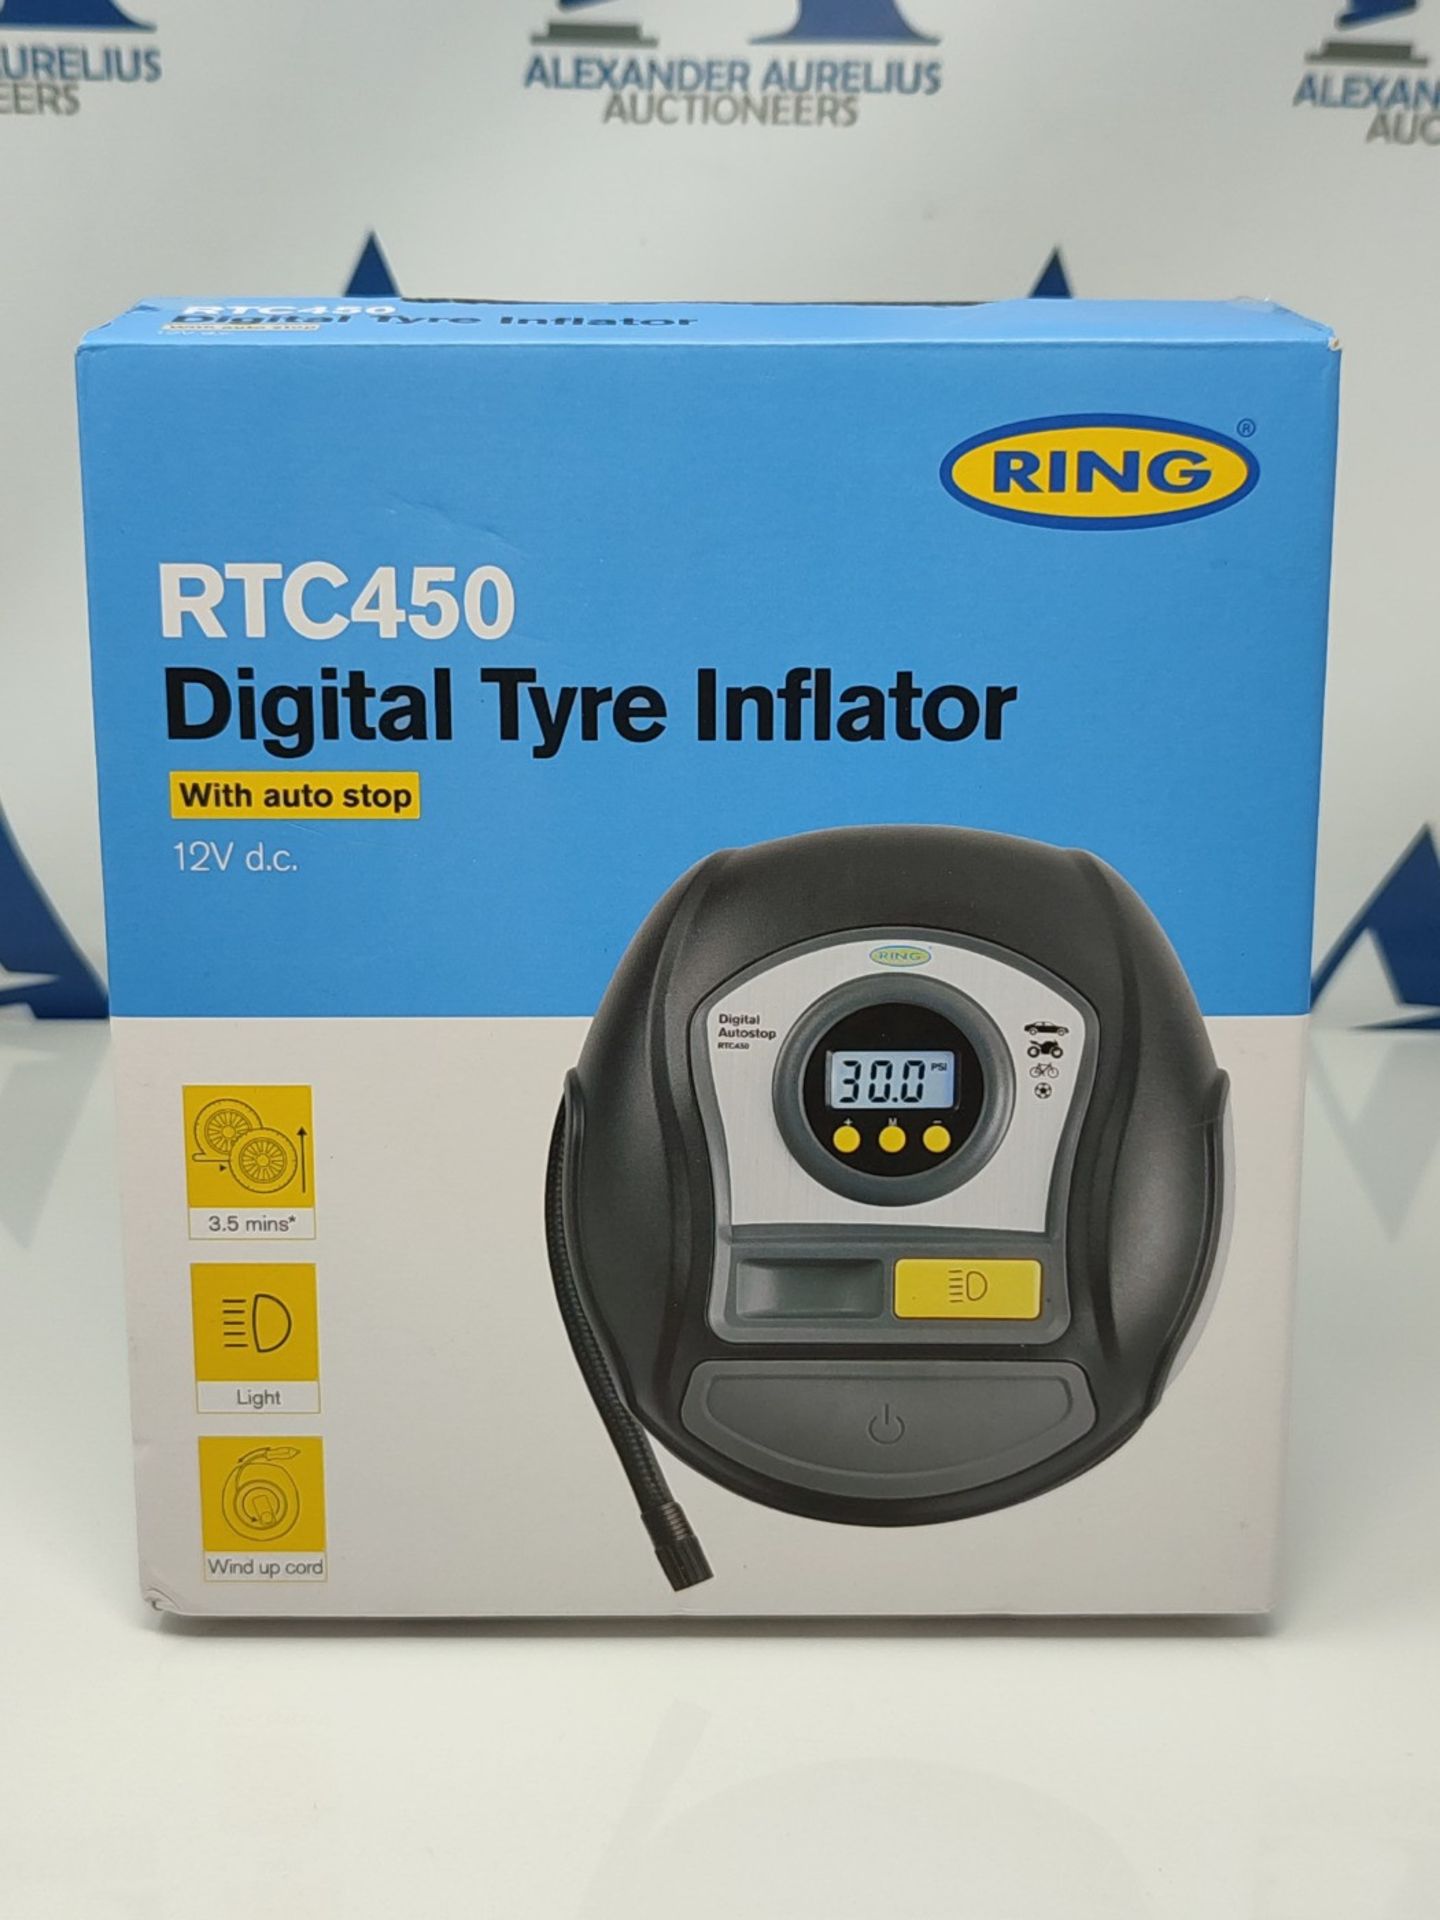 Ring Automotive - RTC450 Digital Tyre Inflator with Auto Stop, Memory, LED Light, Back - Image 5 of 12